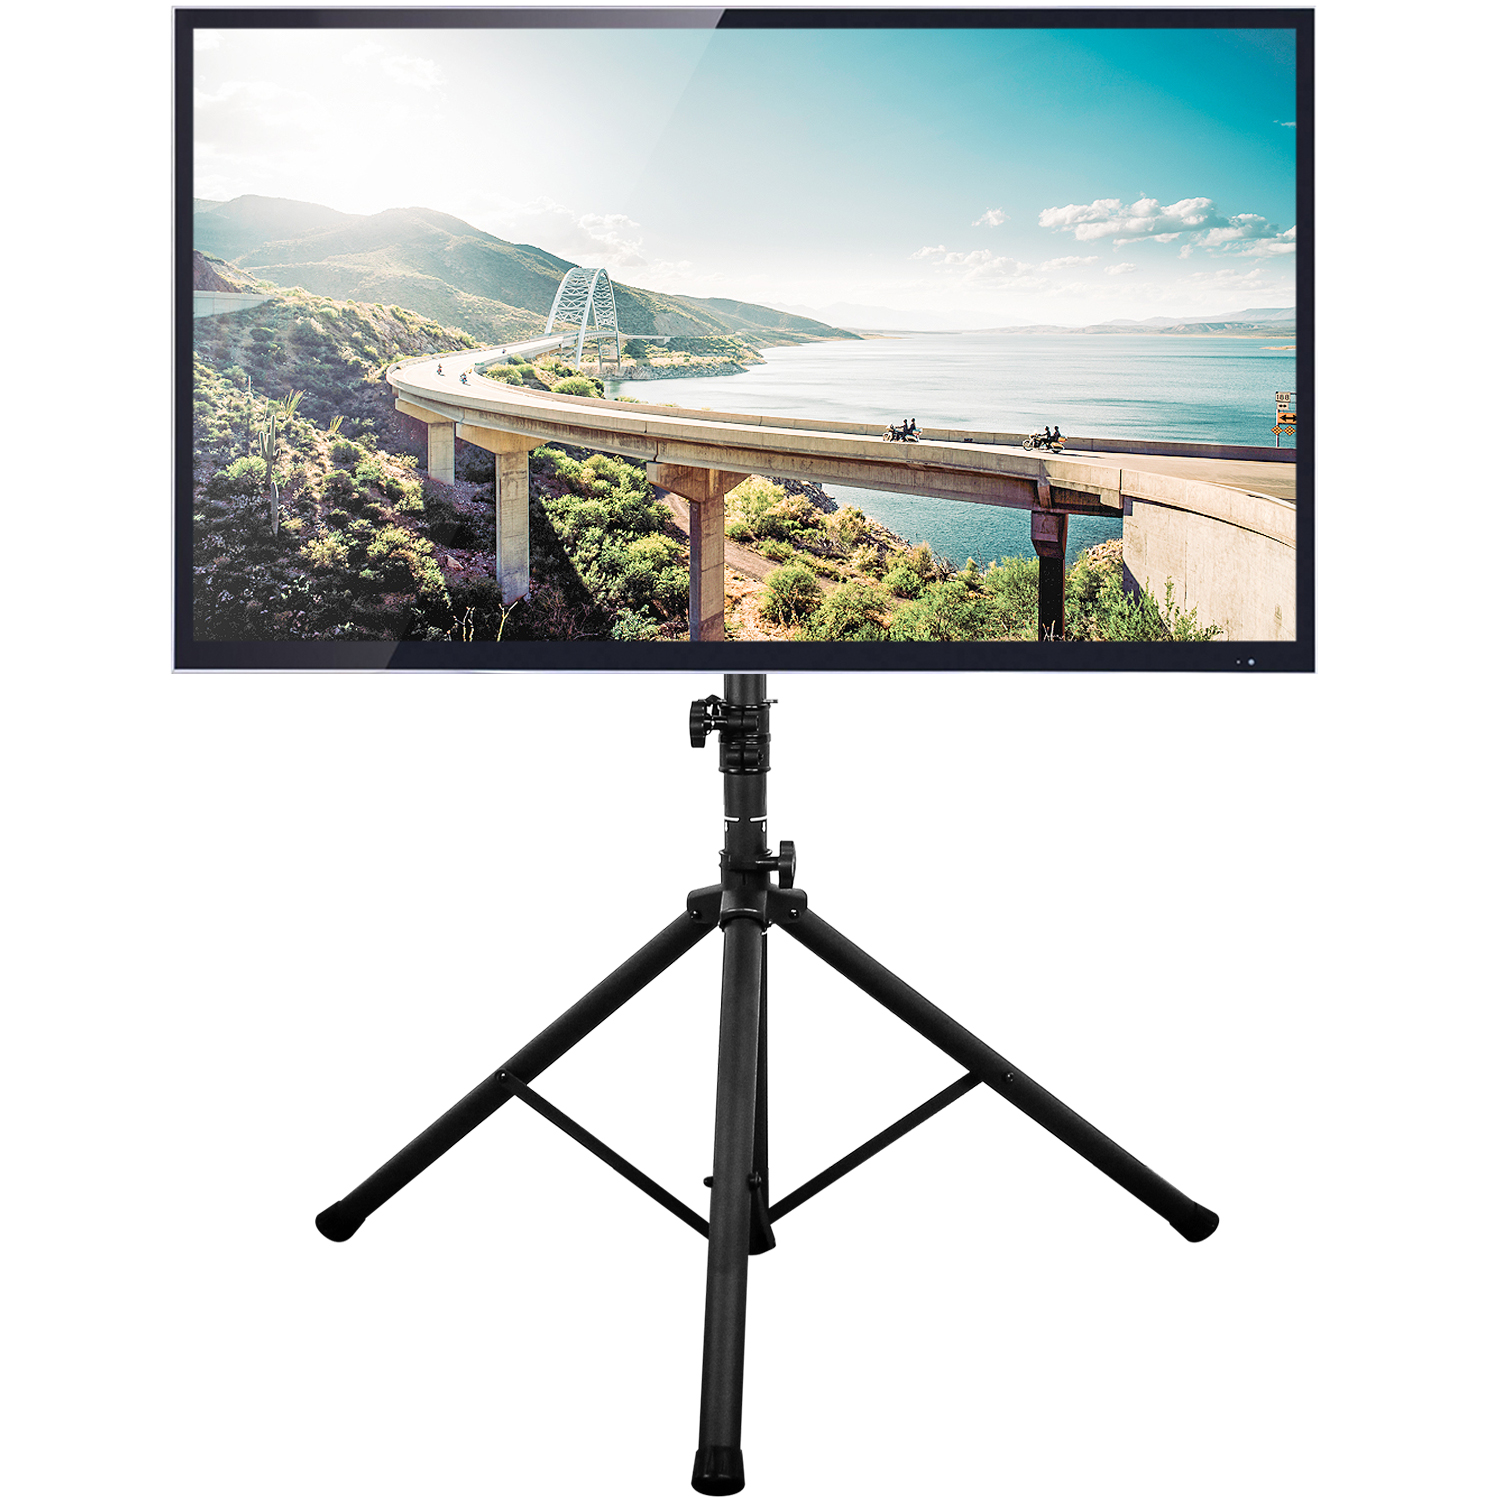 Portable Tripod Tv Stand With Swivel And Tilt Mount For 32 70 Flat